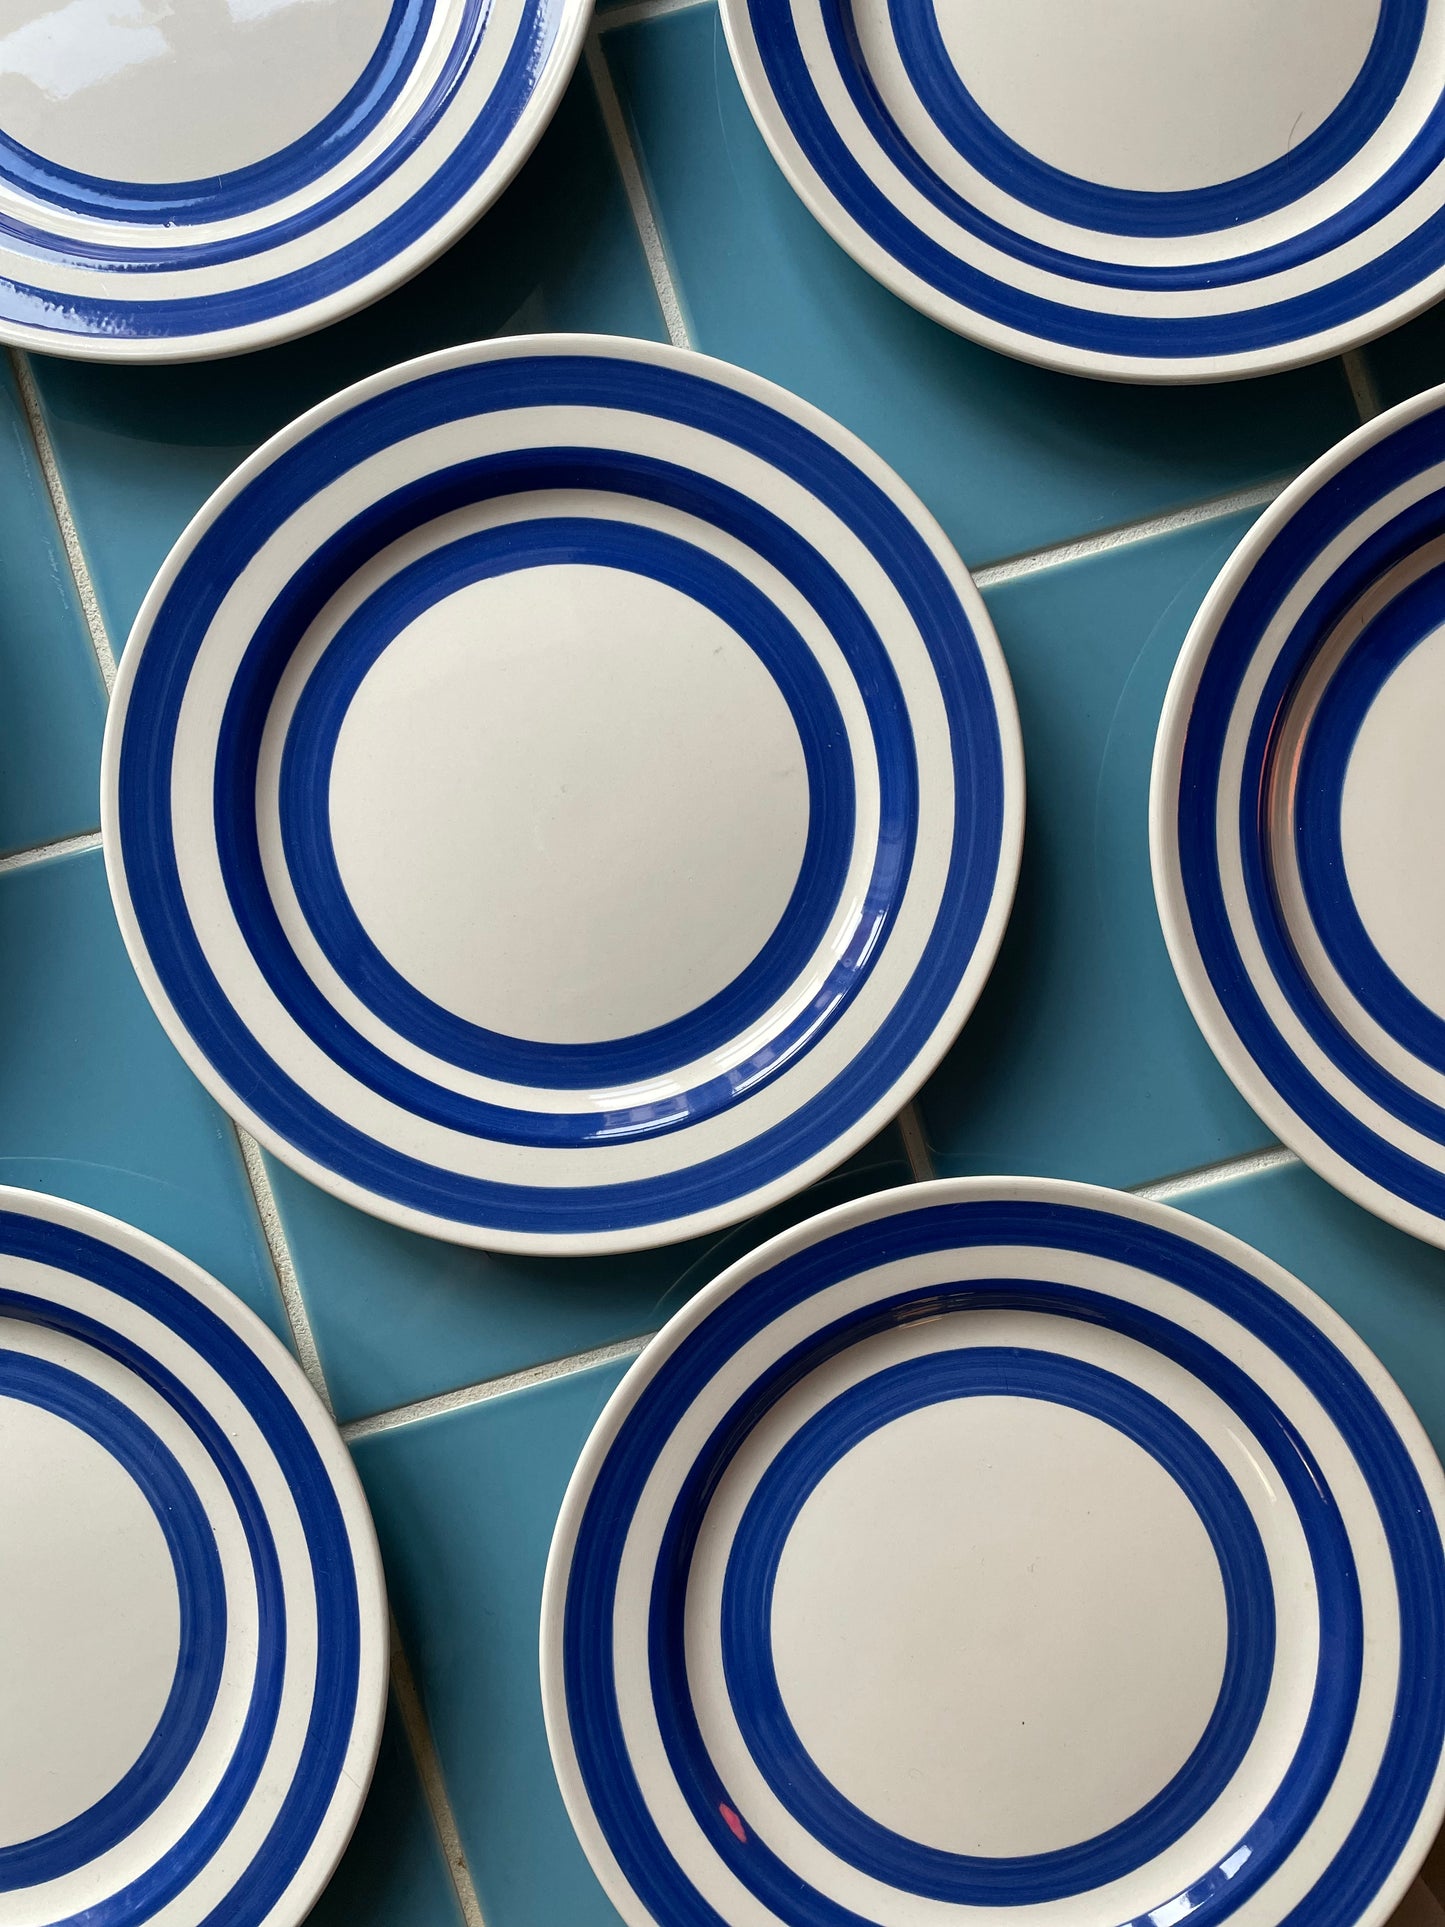 Lunch plates with blue stripes on the edge